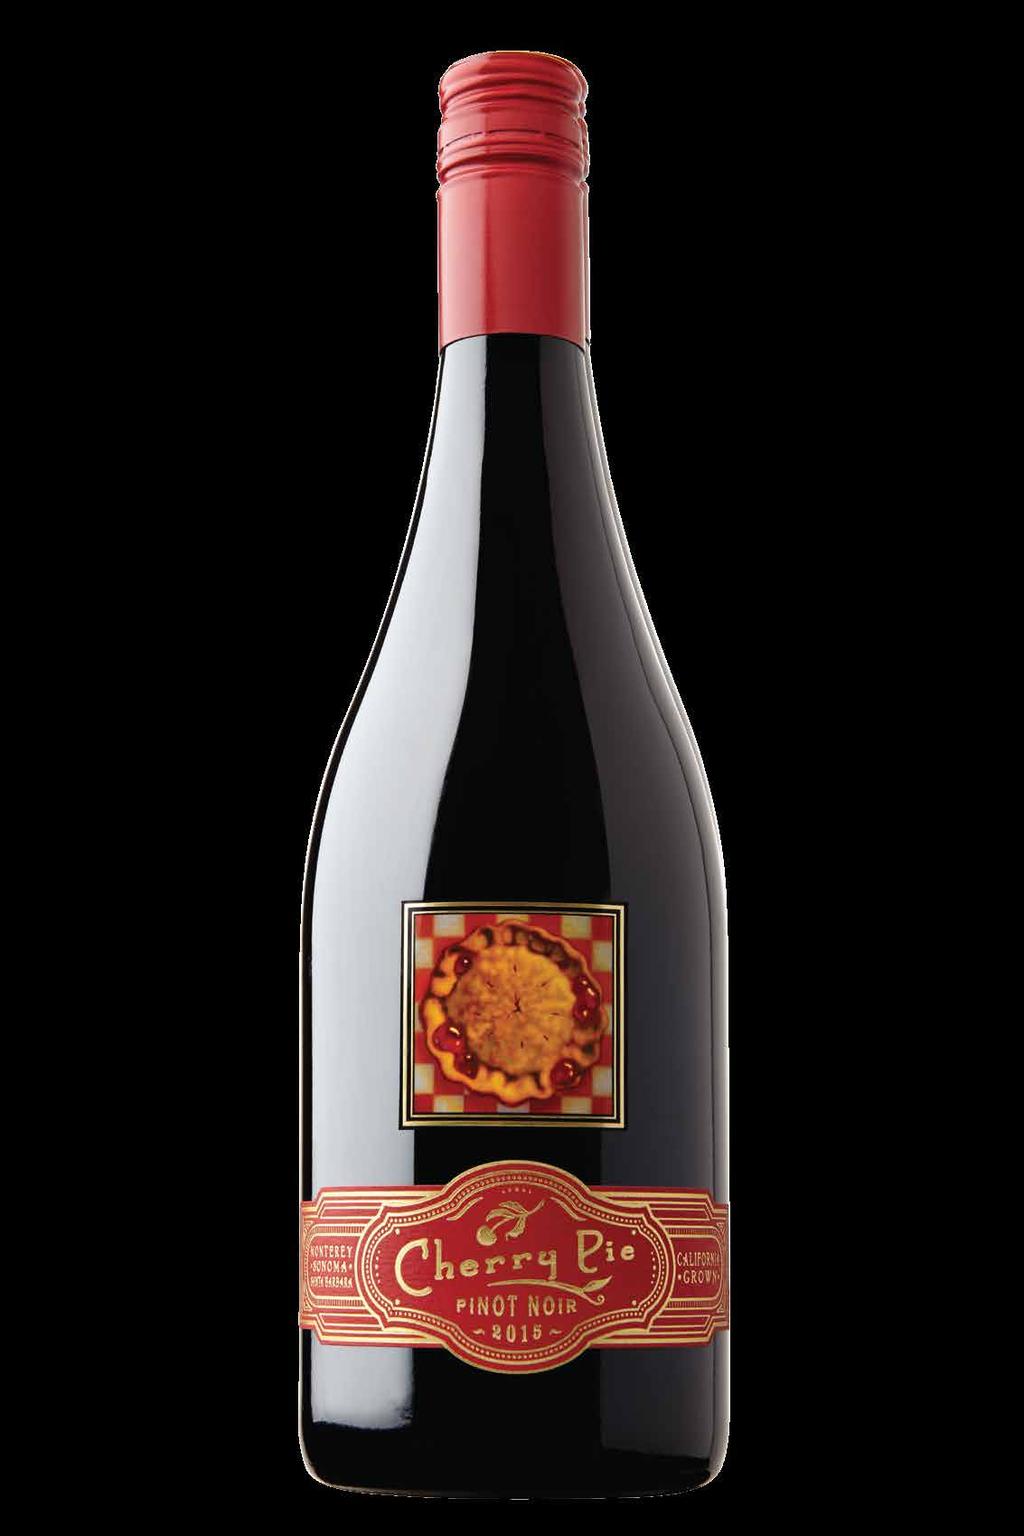 Tasting Notes SRP $19. 99 The 2015 Cherry Pie Pinot Noir jumps from the glass with aromas of raspberry, nutmeg, sandalwood and light smokiness, lifted by a floral note.